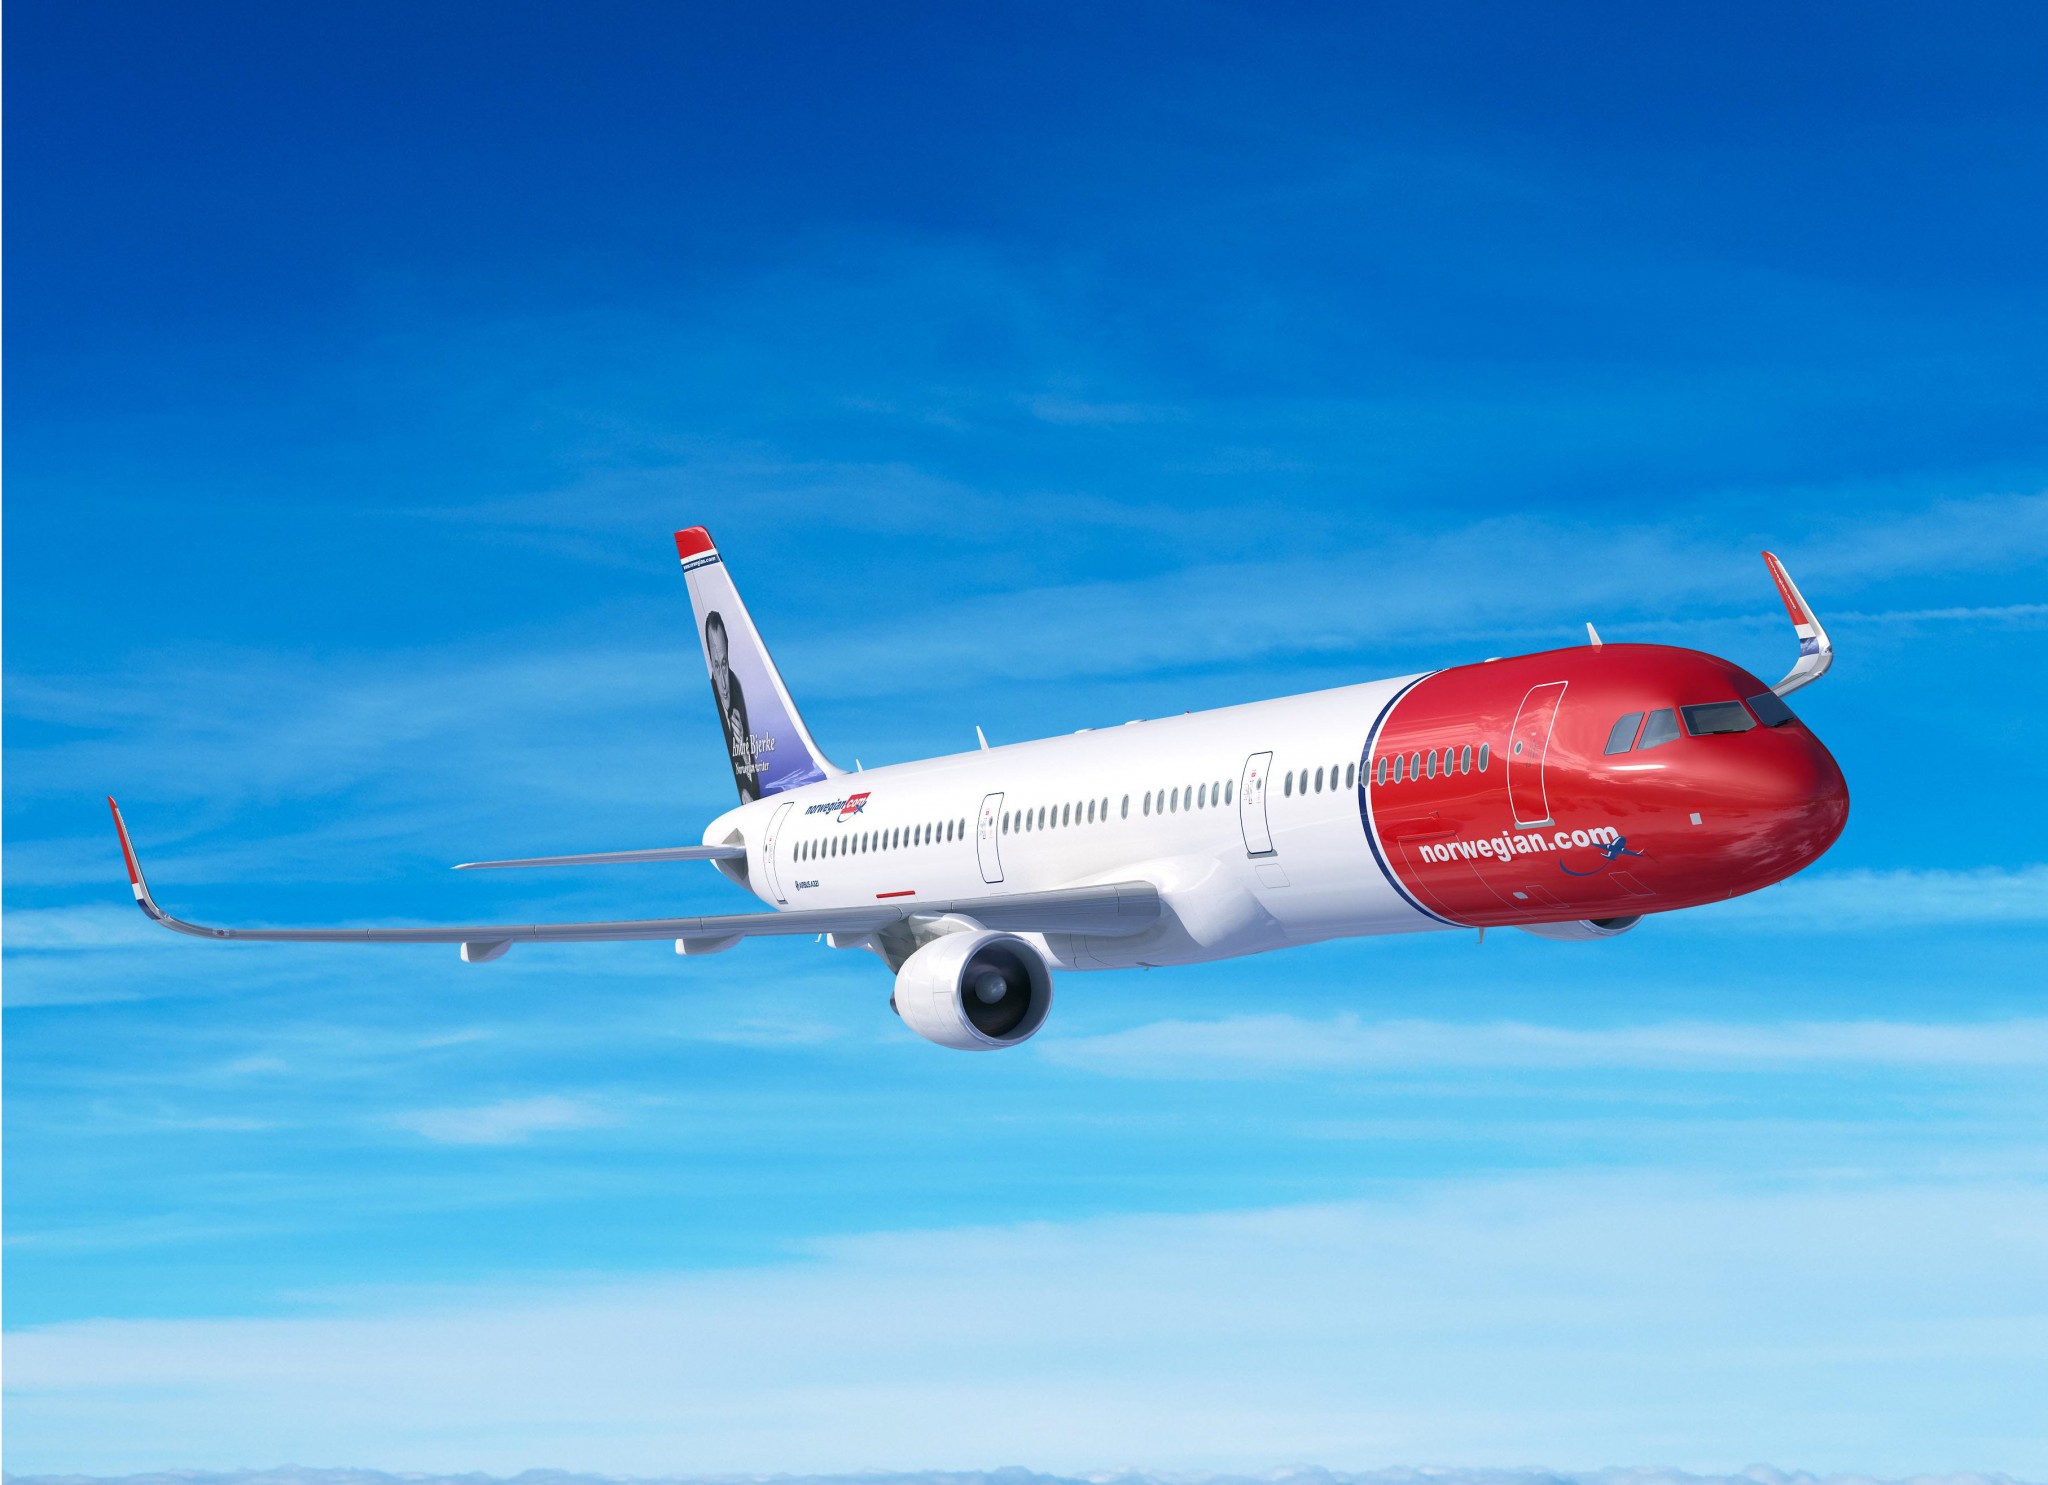 Norwegian reports 11% passenger growth in May